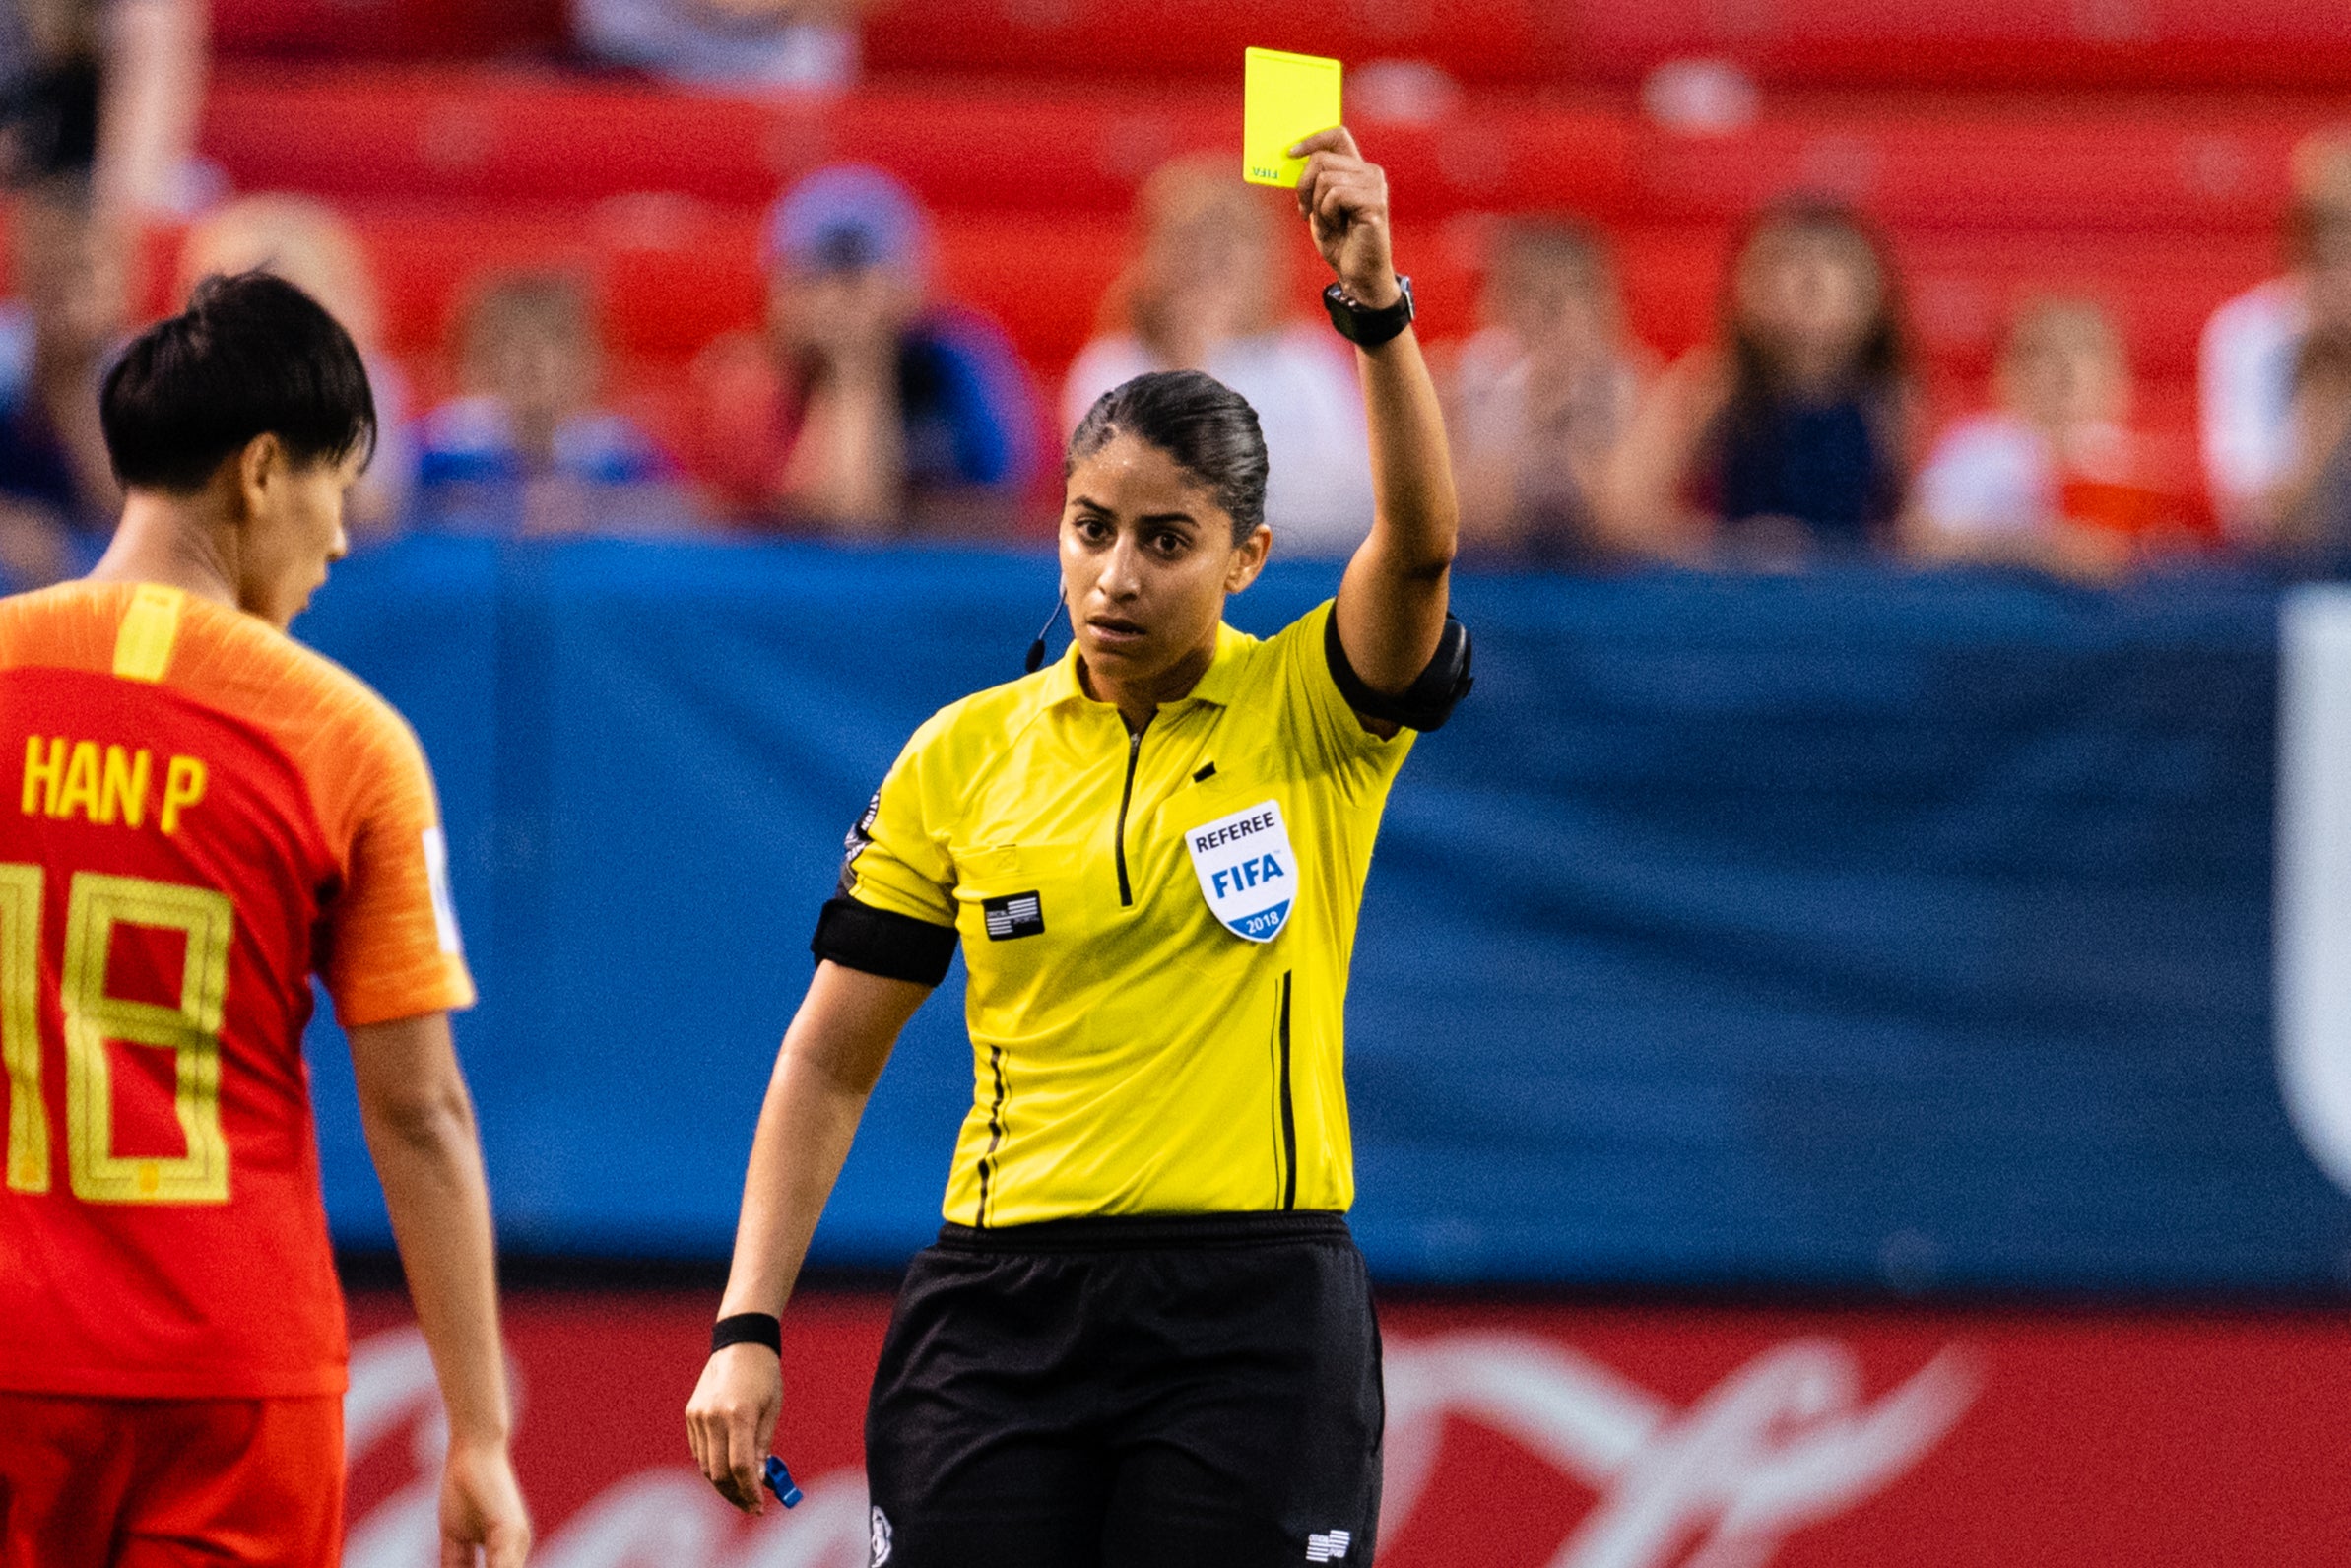 Christina Unkel is a former top level official